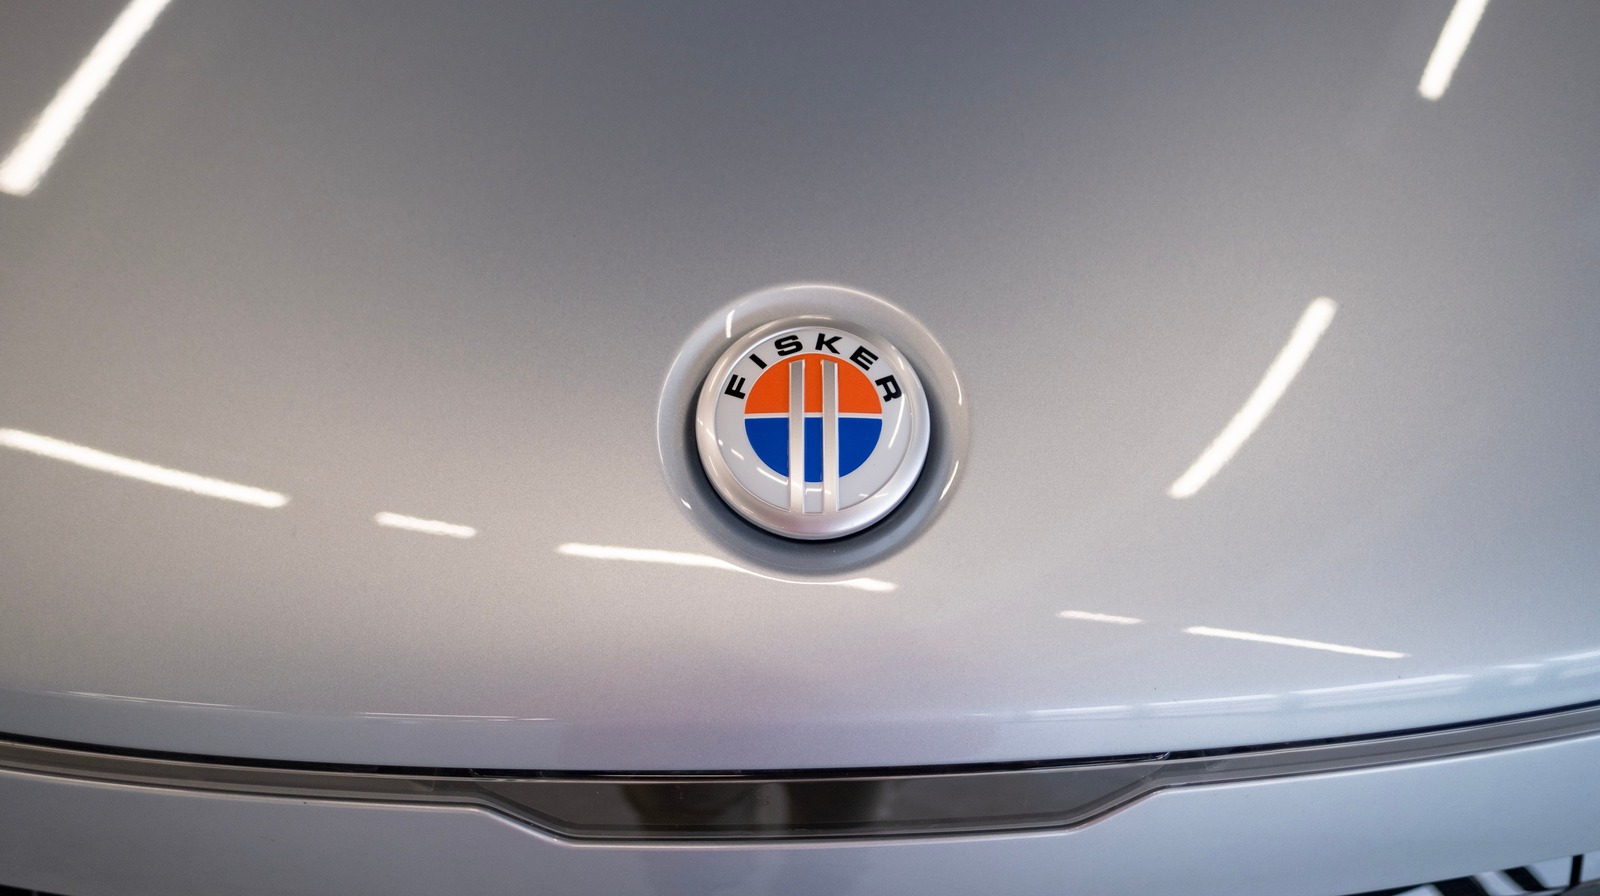 Fisker Files For Bankruptcy: Here's Why We're Not Surprised